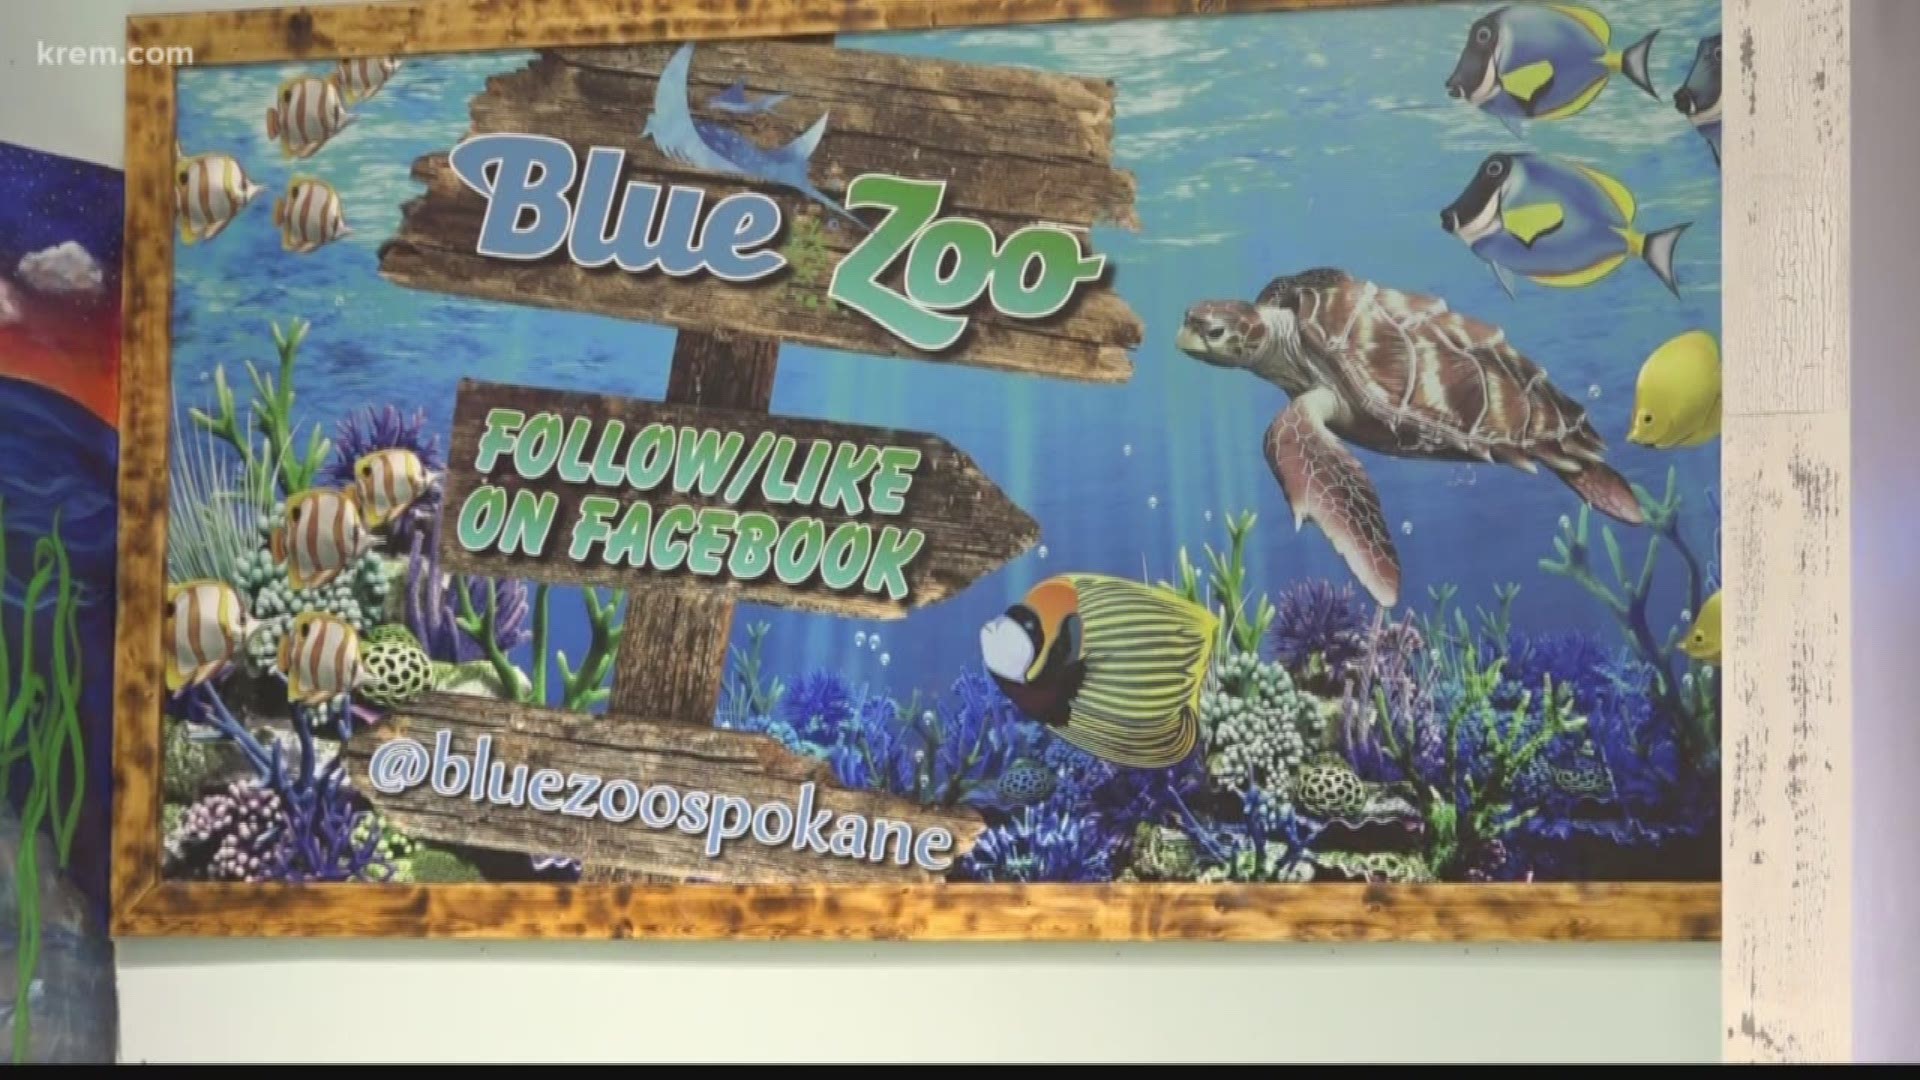 KREM's Amanda Roley spoke with Blue Zoo Aquarium about complaints that claim animals and fish are abused at the facility by visitors.